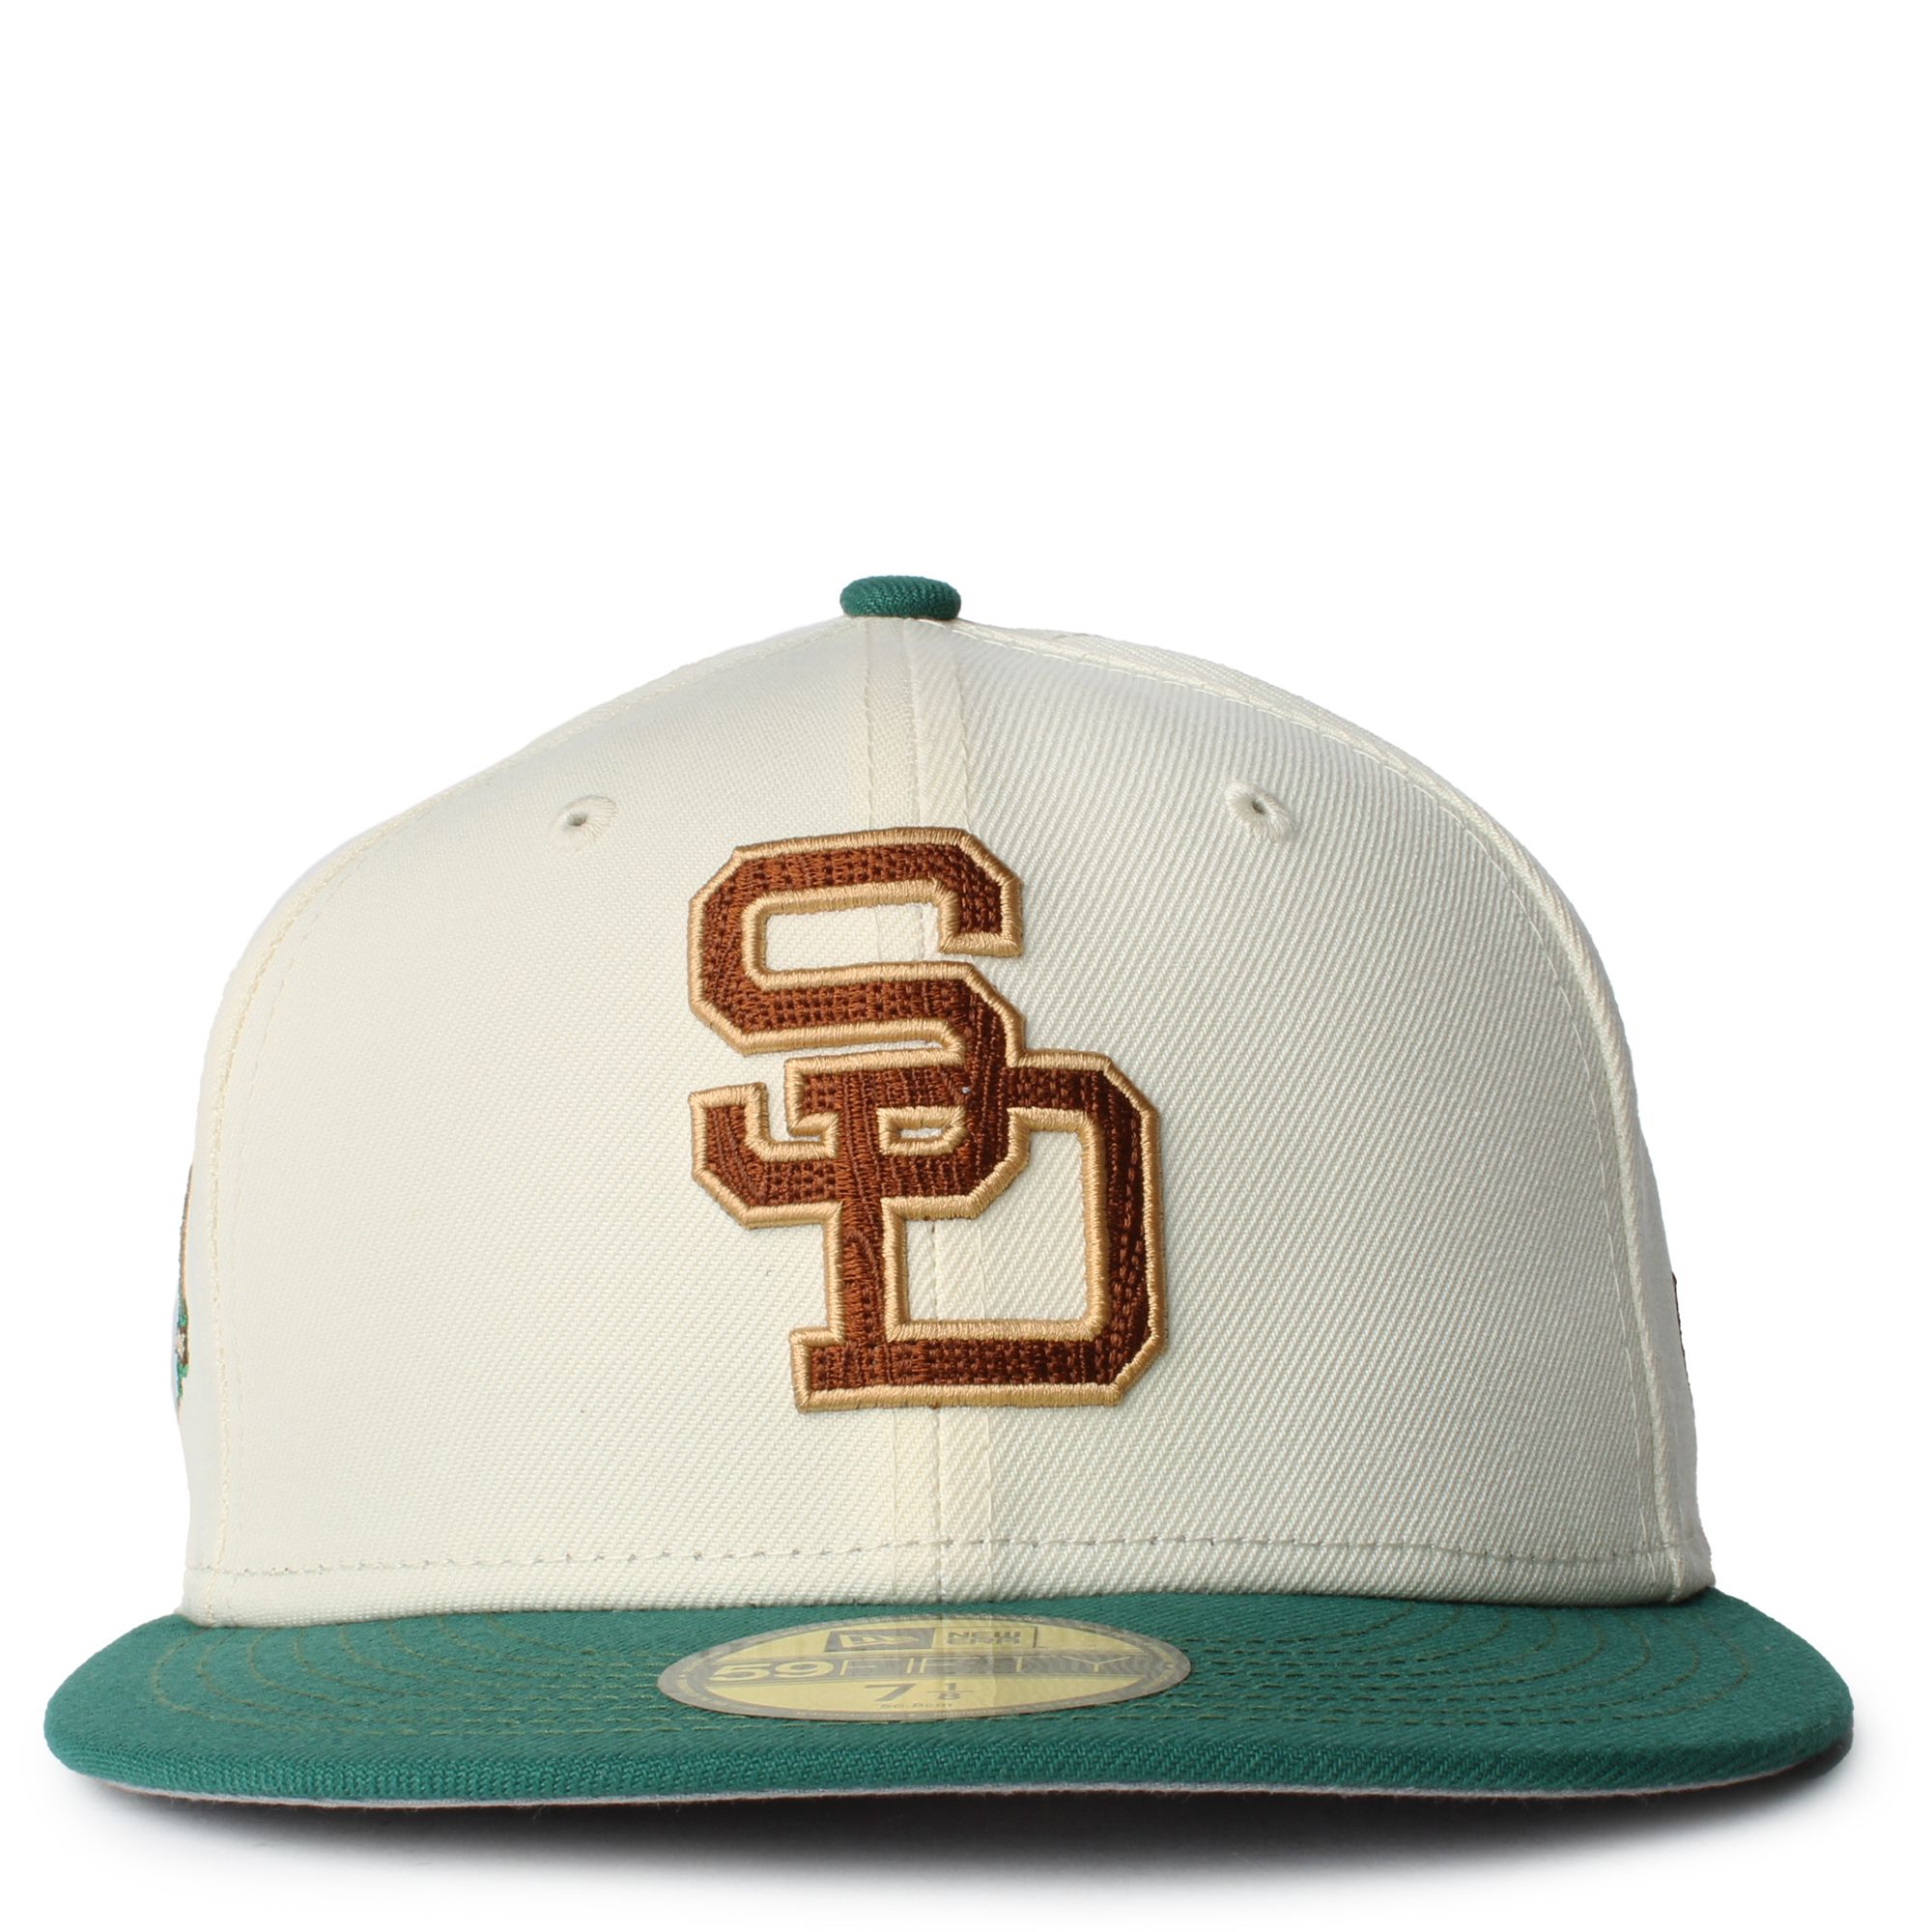 fitted san diego padres hat